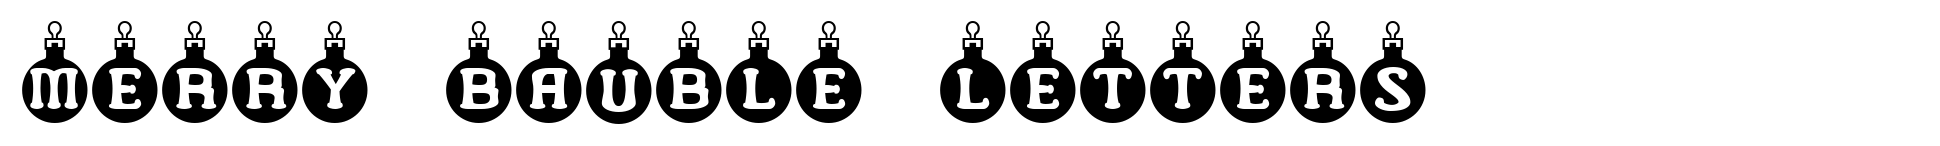 Merry Bauble Letters